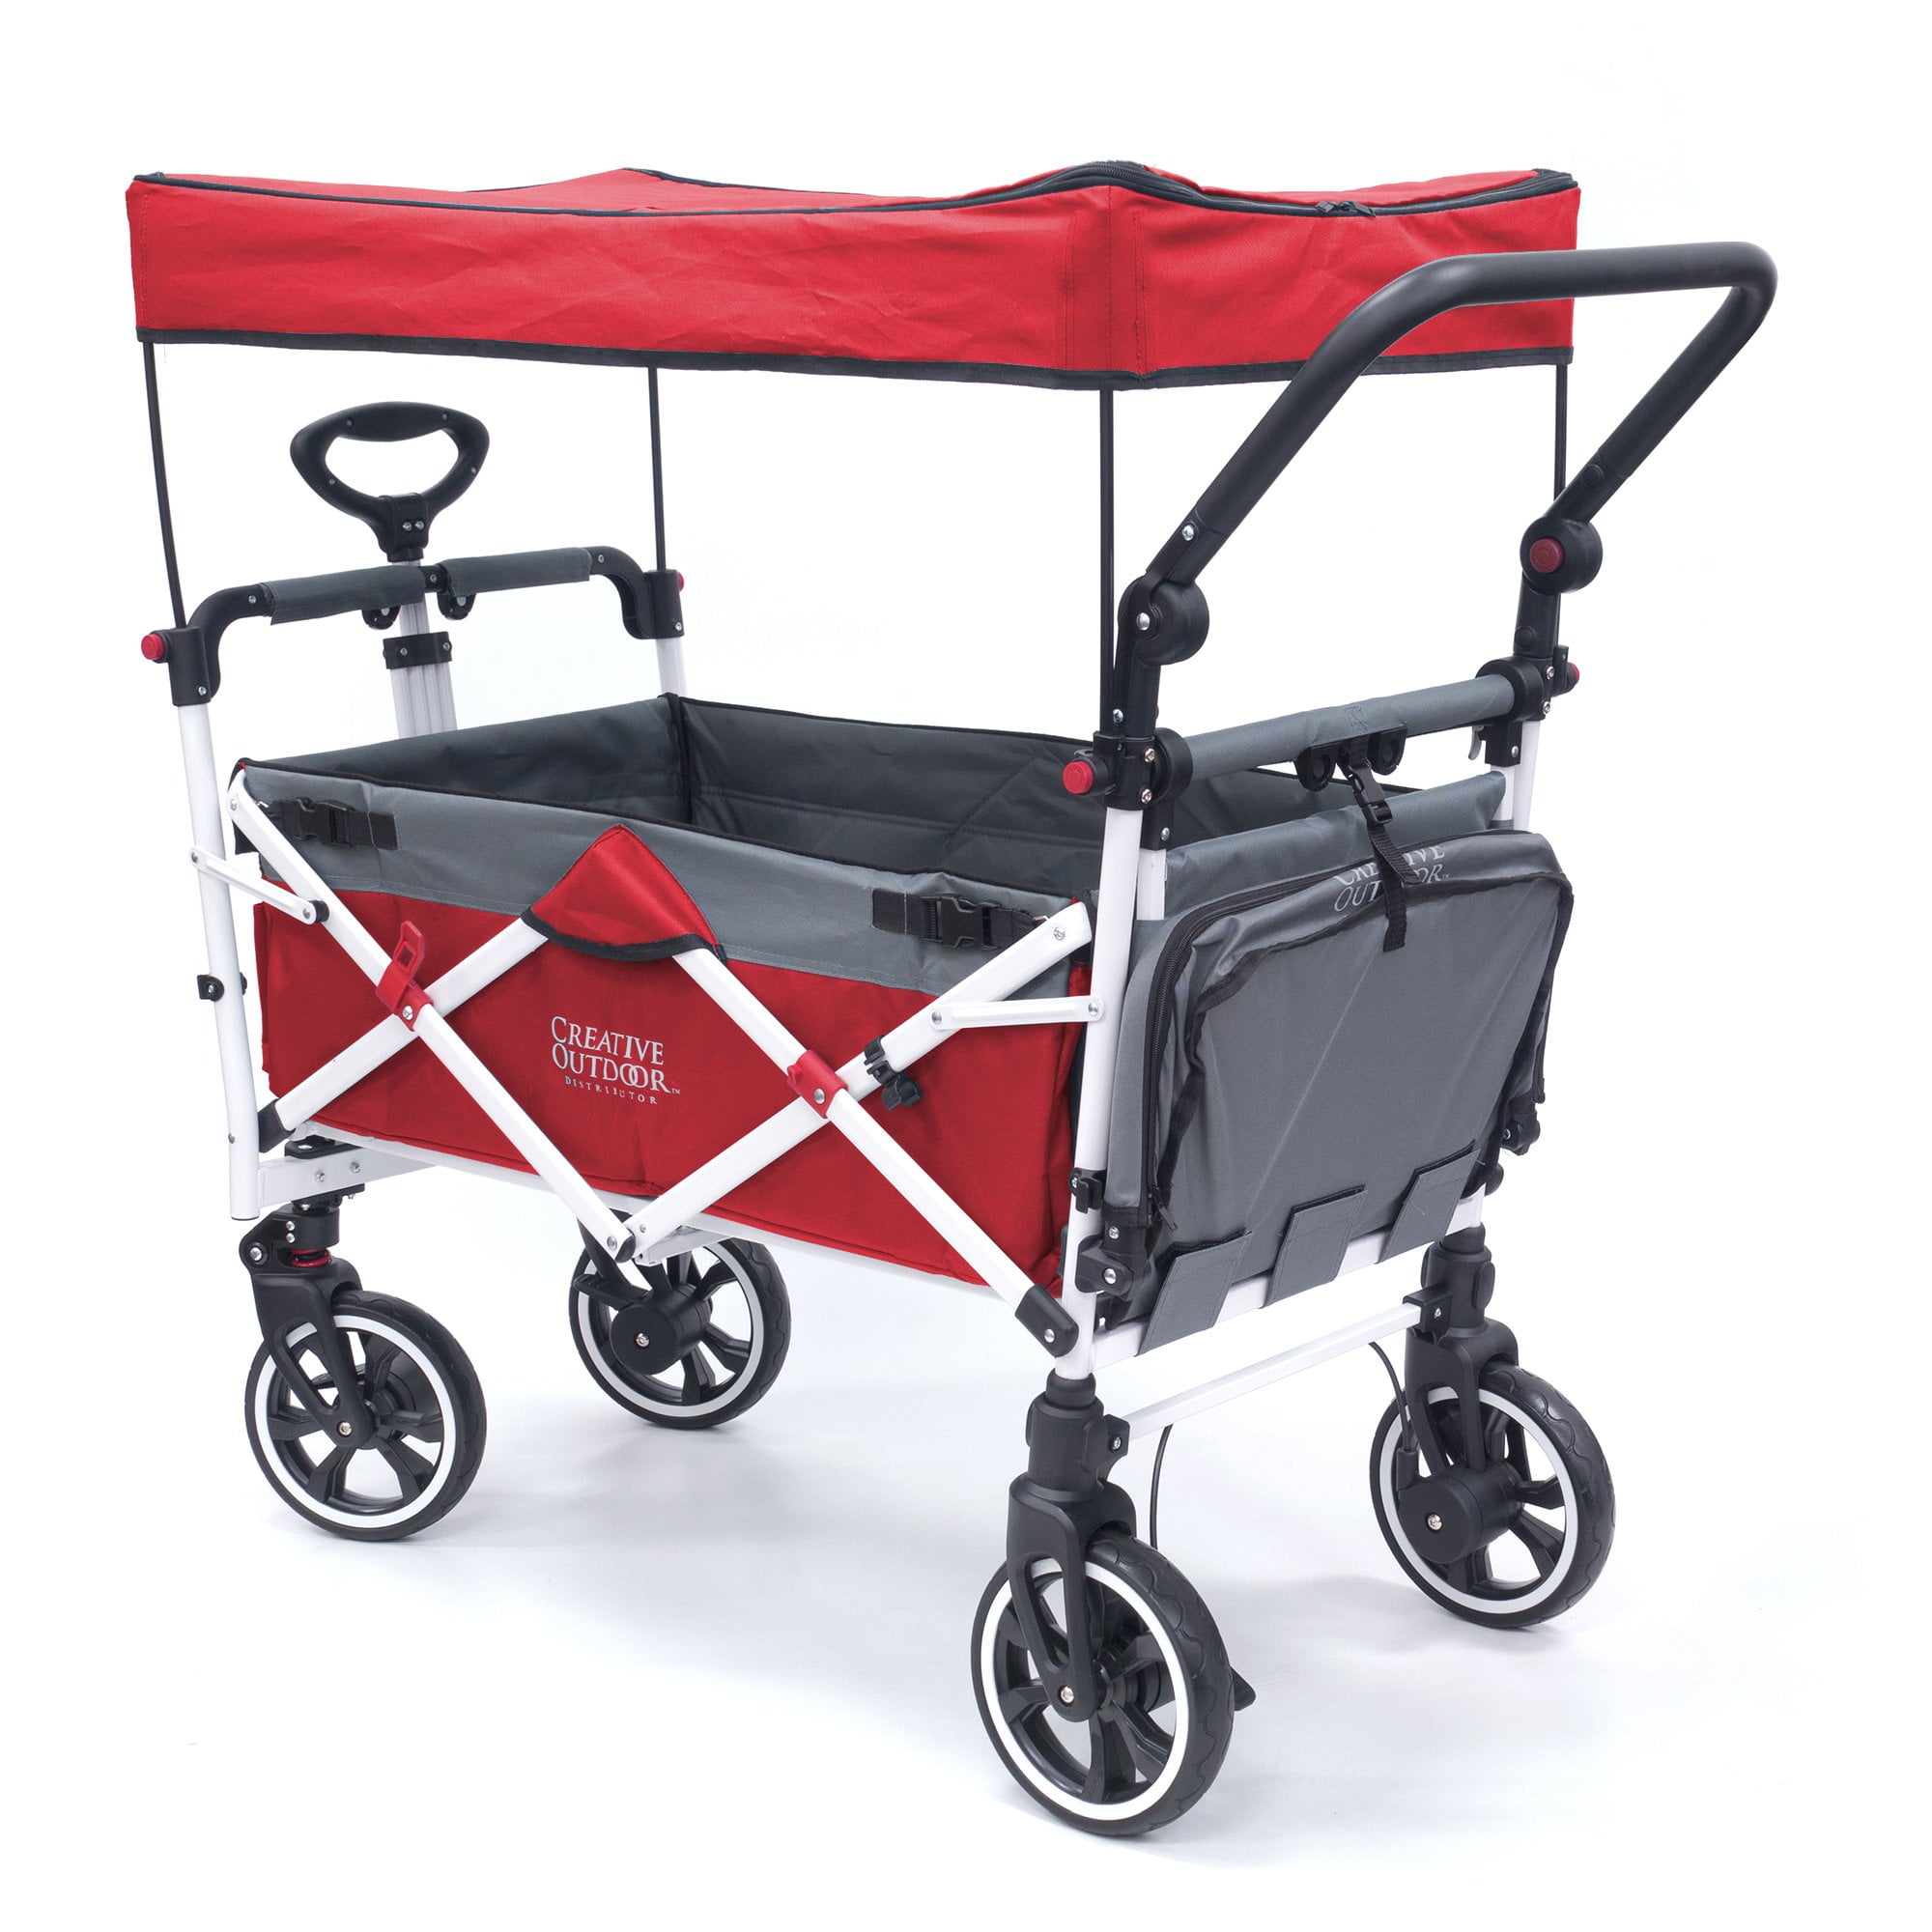 EASY SETUP NO TOOL NECESSARY by WagonBuddy RED PUSH HANDLE AND REAR FOOT BRAKE FOLDING STROLLER WAGON OUTDOOR SPORT COLLAPSIBLE BABY TROLLEY W/ CANOPY GARDEN UTILITY SHOPPING TRAVEL CART